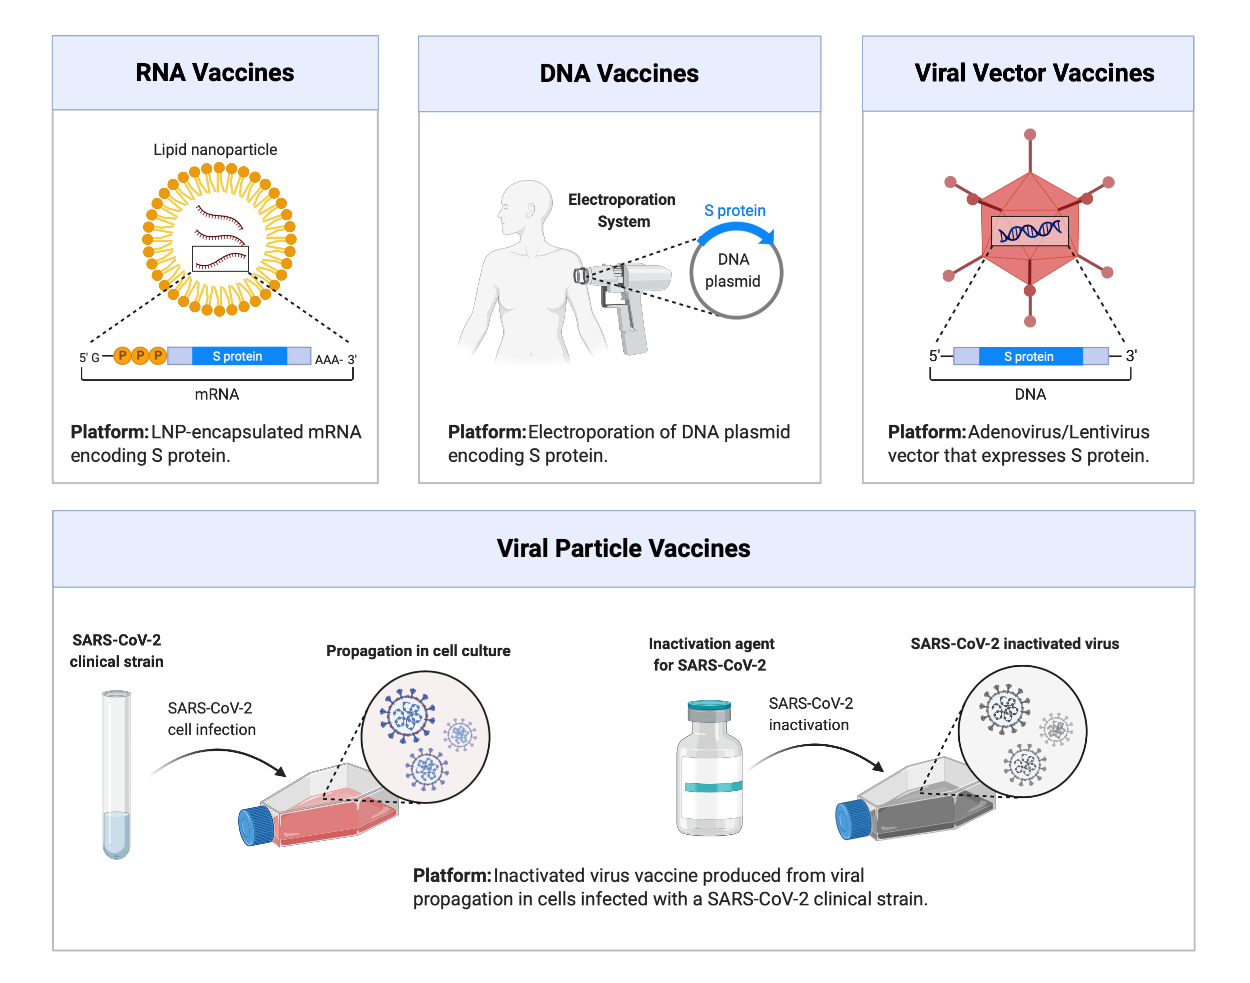 Figure 11: Vaccine Development Strategies. Several different strategies can and are being employed for the development of vaccines today. Each approach capitalizes on different features of the SARS-CoV-2 virus and delivery through a different platform. All of these approaches are being explored in the current pandemic.